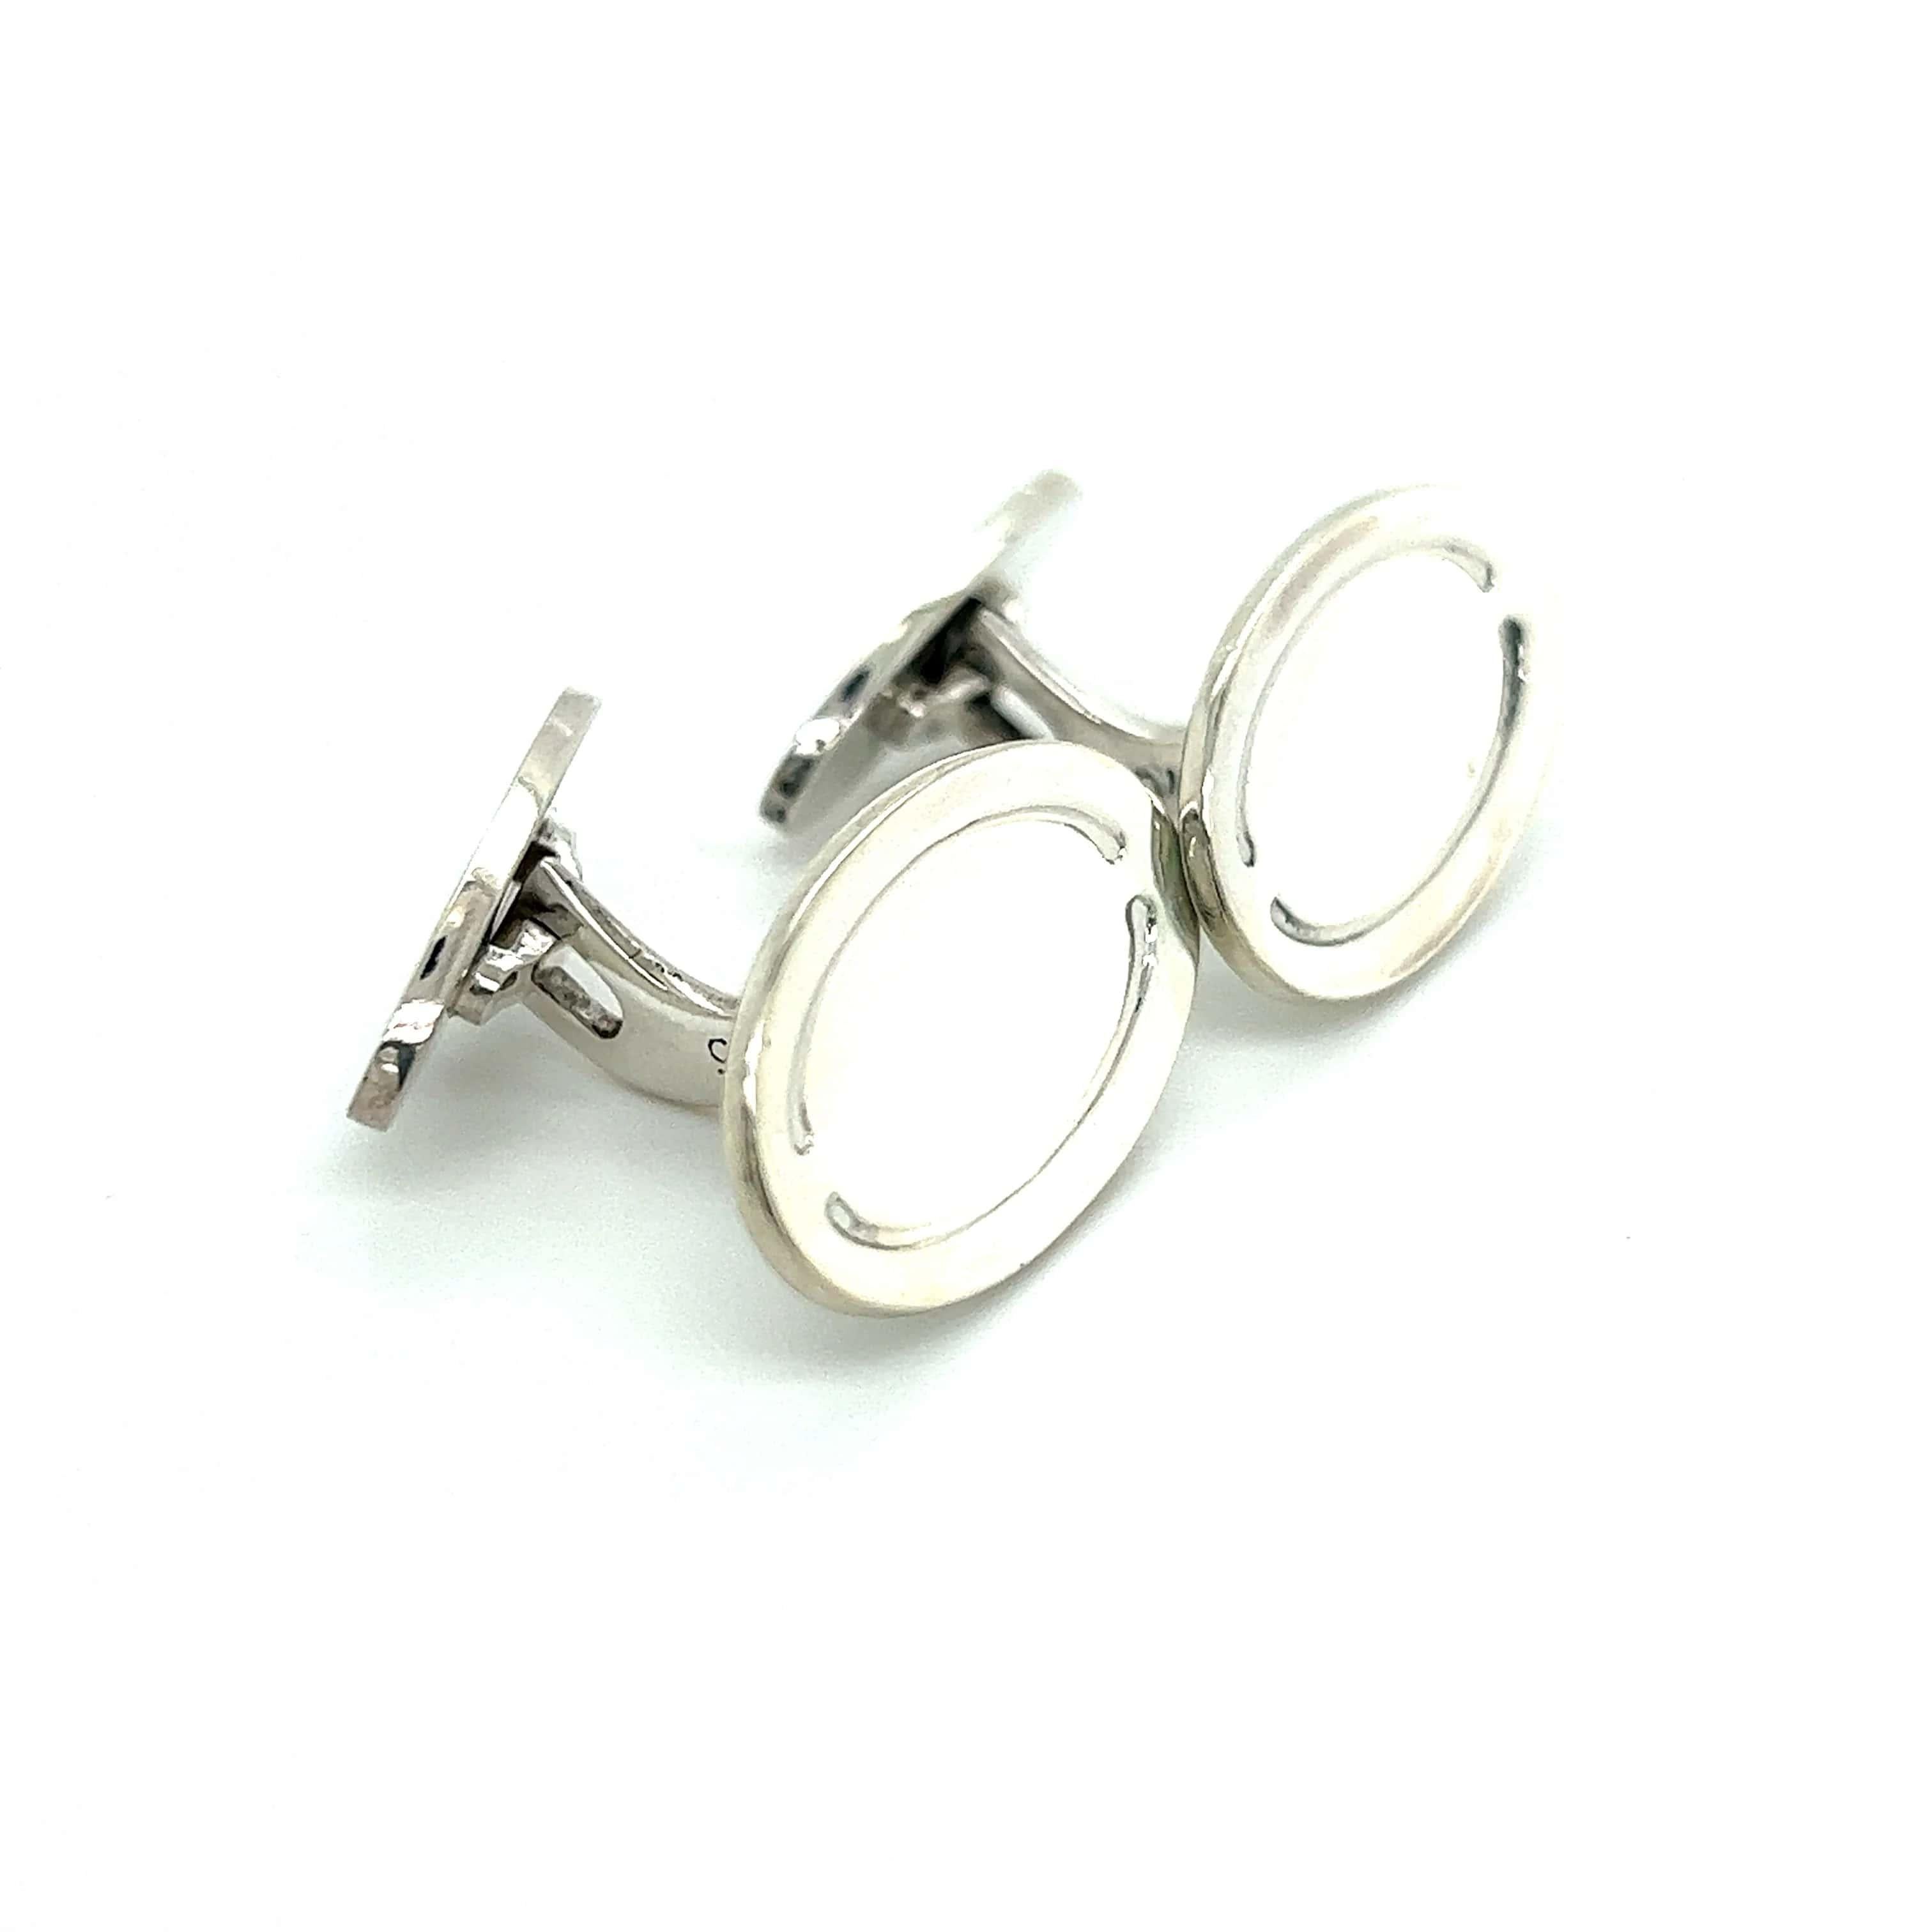 Georg Jensen Estate Mens Cufflinks Sterling Silver GJ22

These elegant Authentic Georg Jensen Men's Cufflinks are made of sterling silver and have a weight of 15 grams.

TRUSTED SELLER SINCE 2002

PLEASE SEE OUR HUNDREDS OF POSITIVE FEEDBACKS FROM